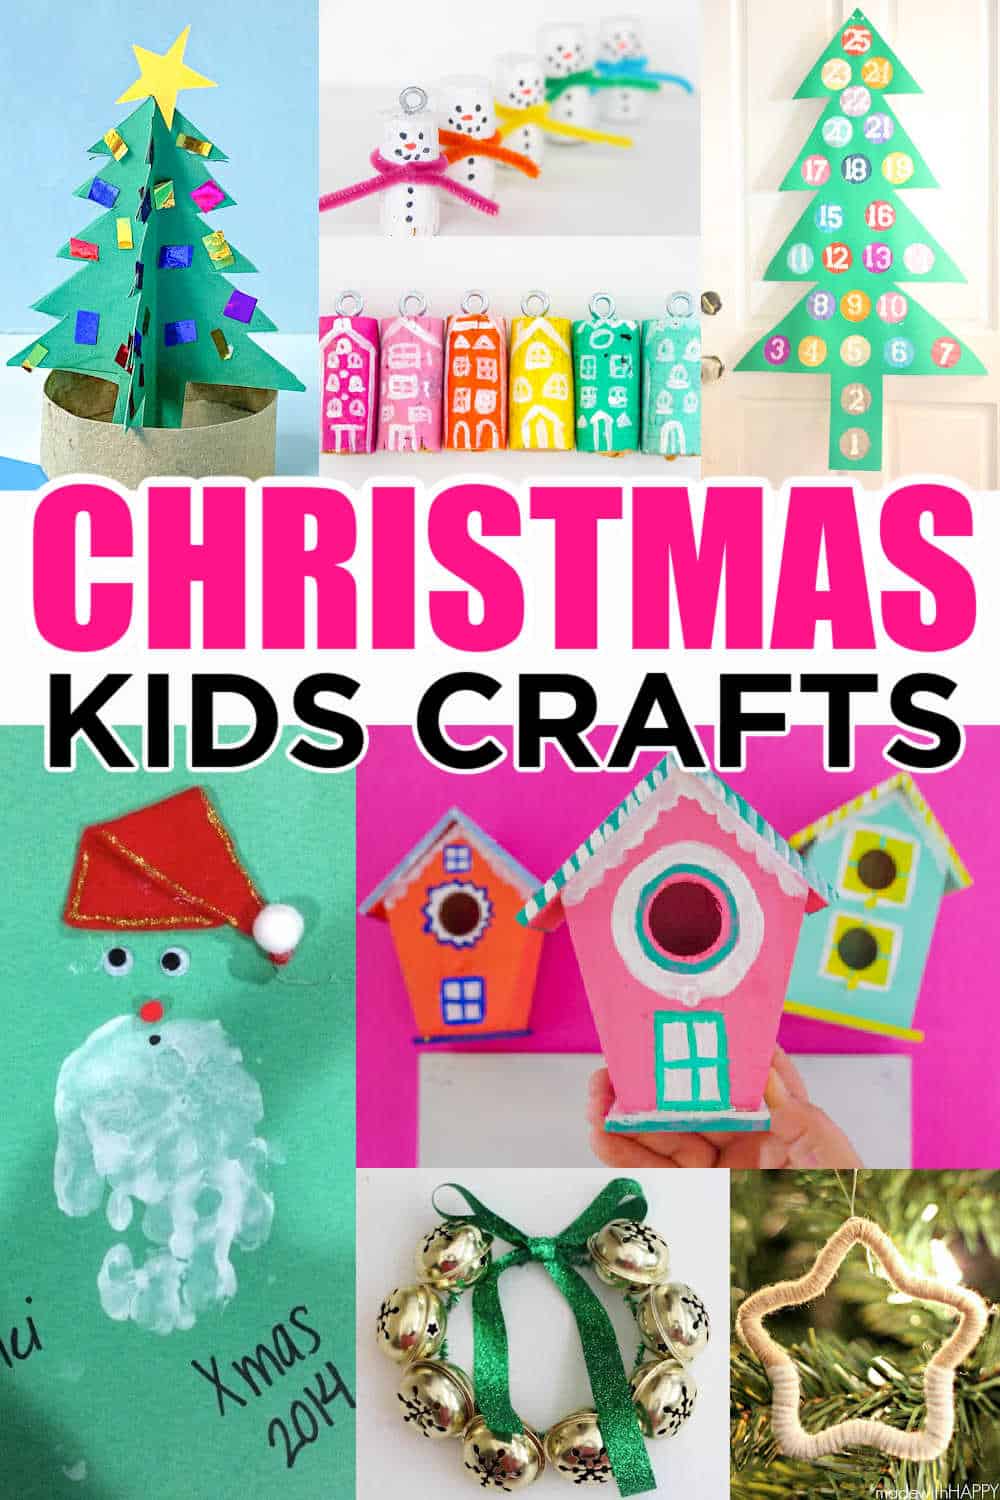 finished torn wrapping paper Christmas tree crafts - This Reading Mama